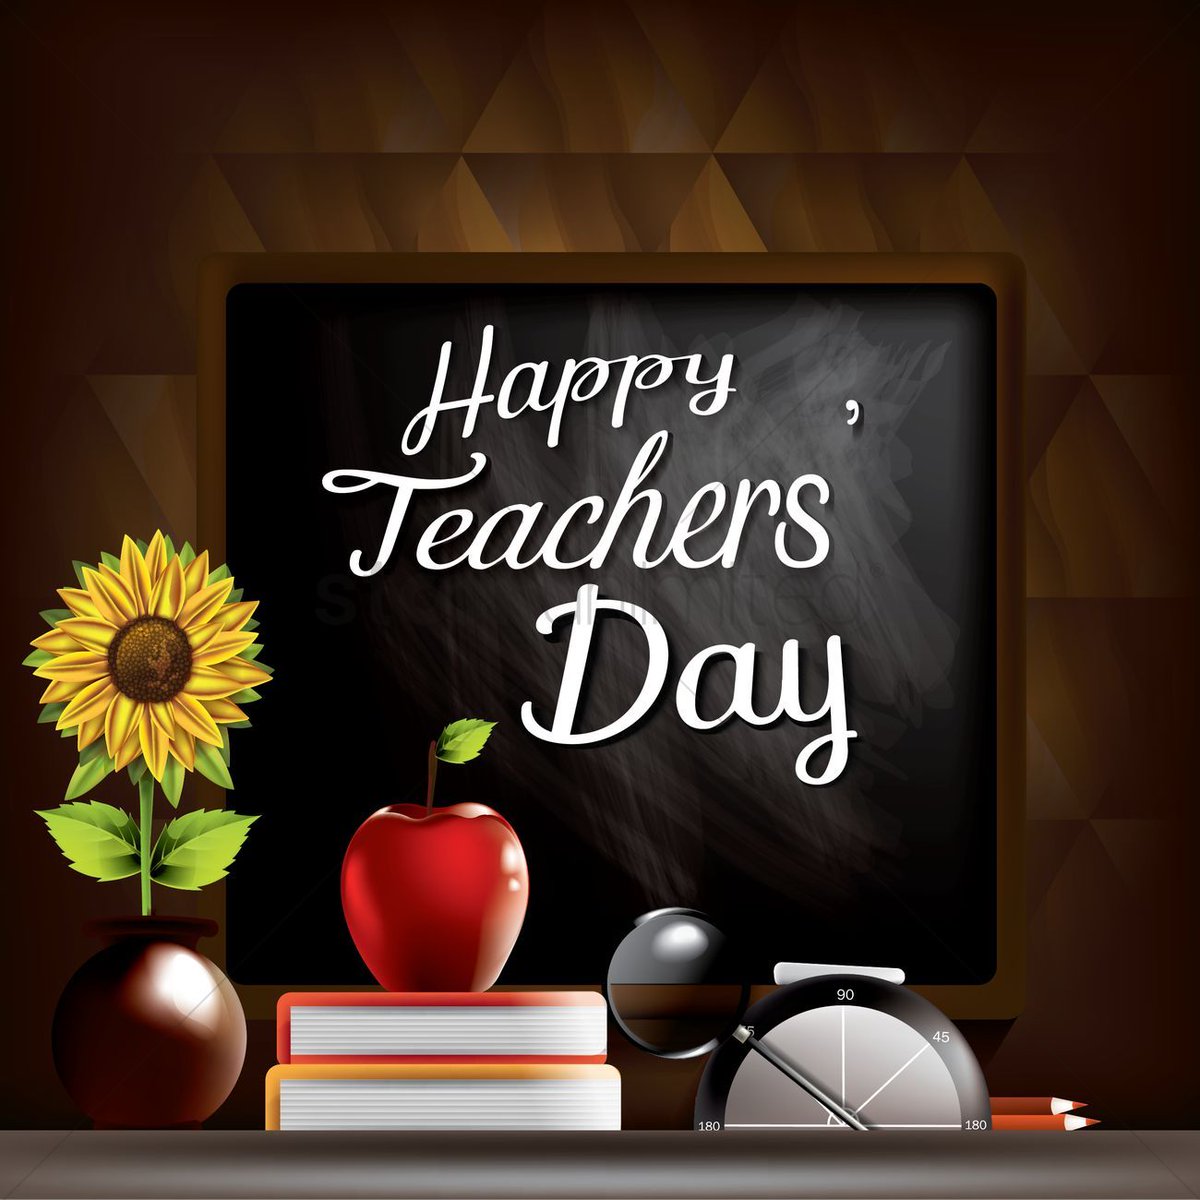 It’s #NationalTeacherDay! 'Teachers plant the seeds of knowledge that grow forever.' #teacher #happyteachersday #education #school #tees #imprintedtees #imprintedapparel #customapparel #screenprinting #KNC #fulfillment #graphicdesign #promtionalproducts #shoplocal #smallbusiness